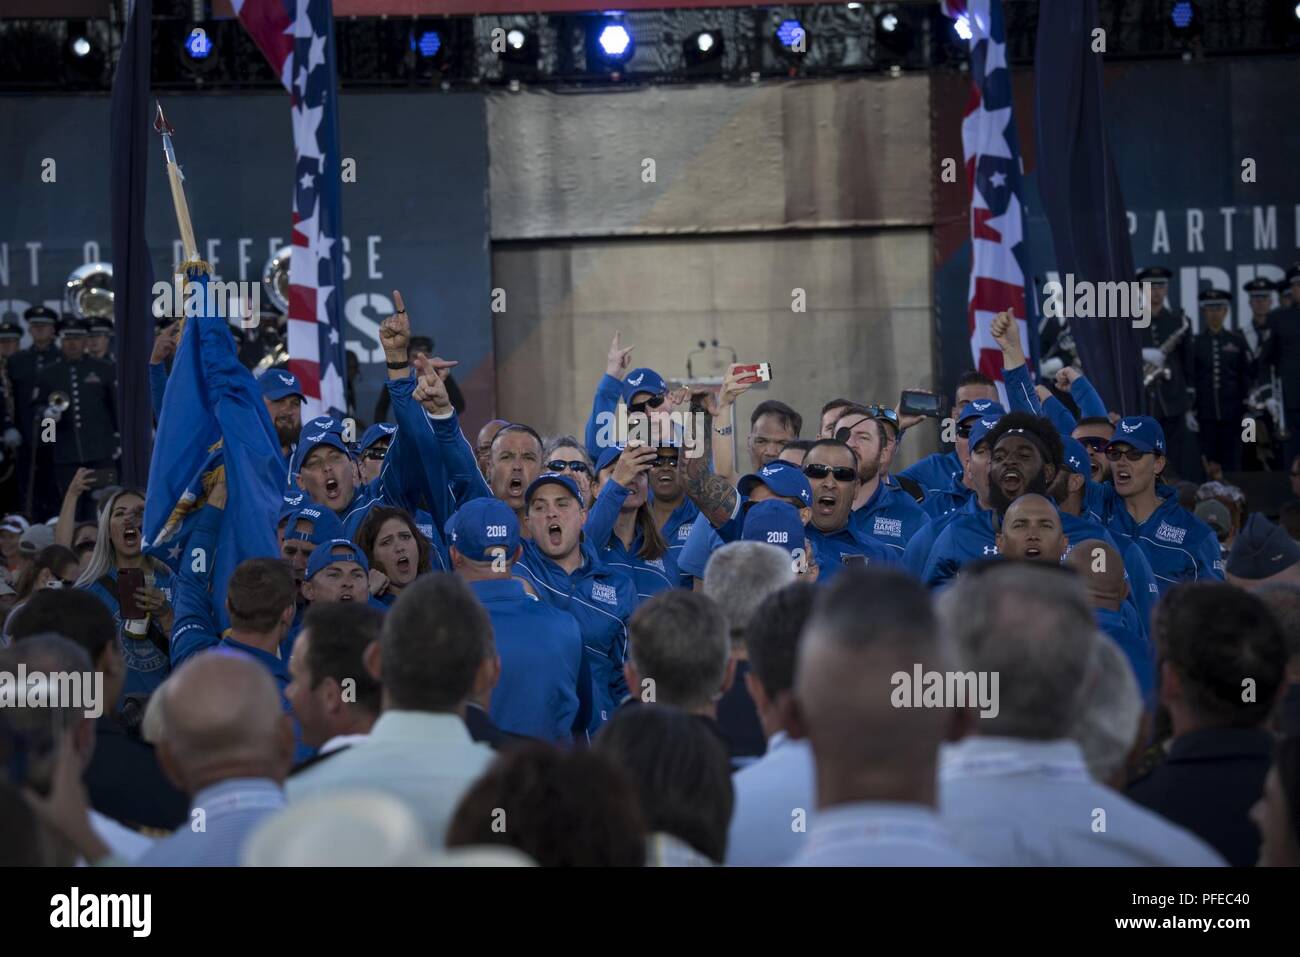 Team Air Force celebrates after walking into the opening ceremony of the Department of Defense Warrior Games in Colorado Springs, Colorado, June 2, 2018. First held in Colorado Springs in 2010, the Warrior Games were established as a way to enhance the recovery and rehabilitation of wounded, ill, and injured service members and expose them to adaptive sports. This year, the Games have returned to Colorado Springs, with the Air Force as the host service. Stock Photo